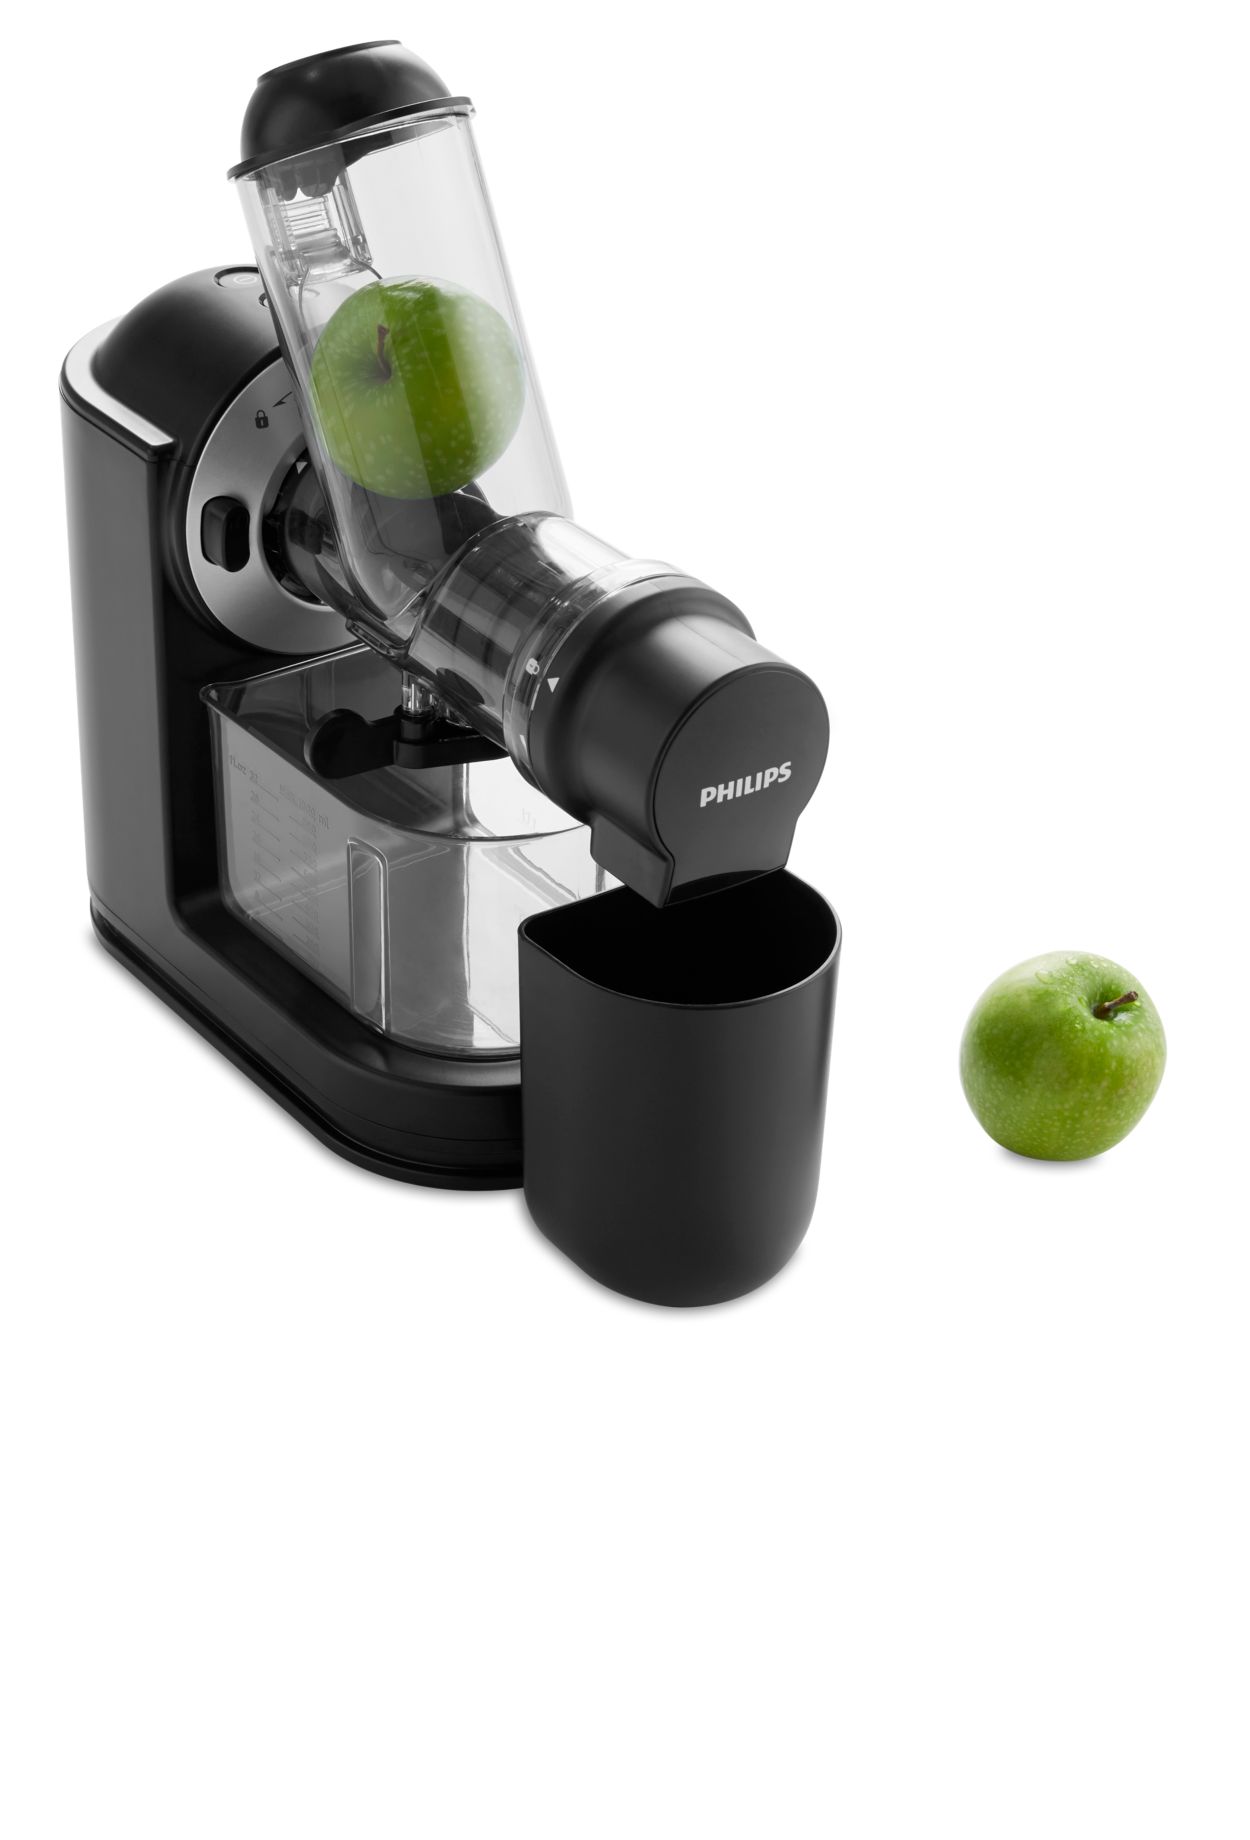 Slow Philips Juicer | Collection Viva HR1889/70